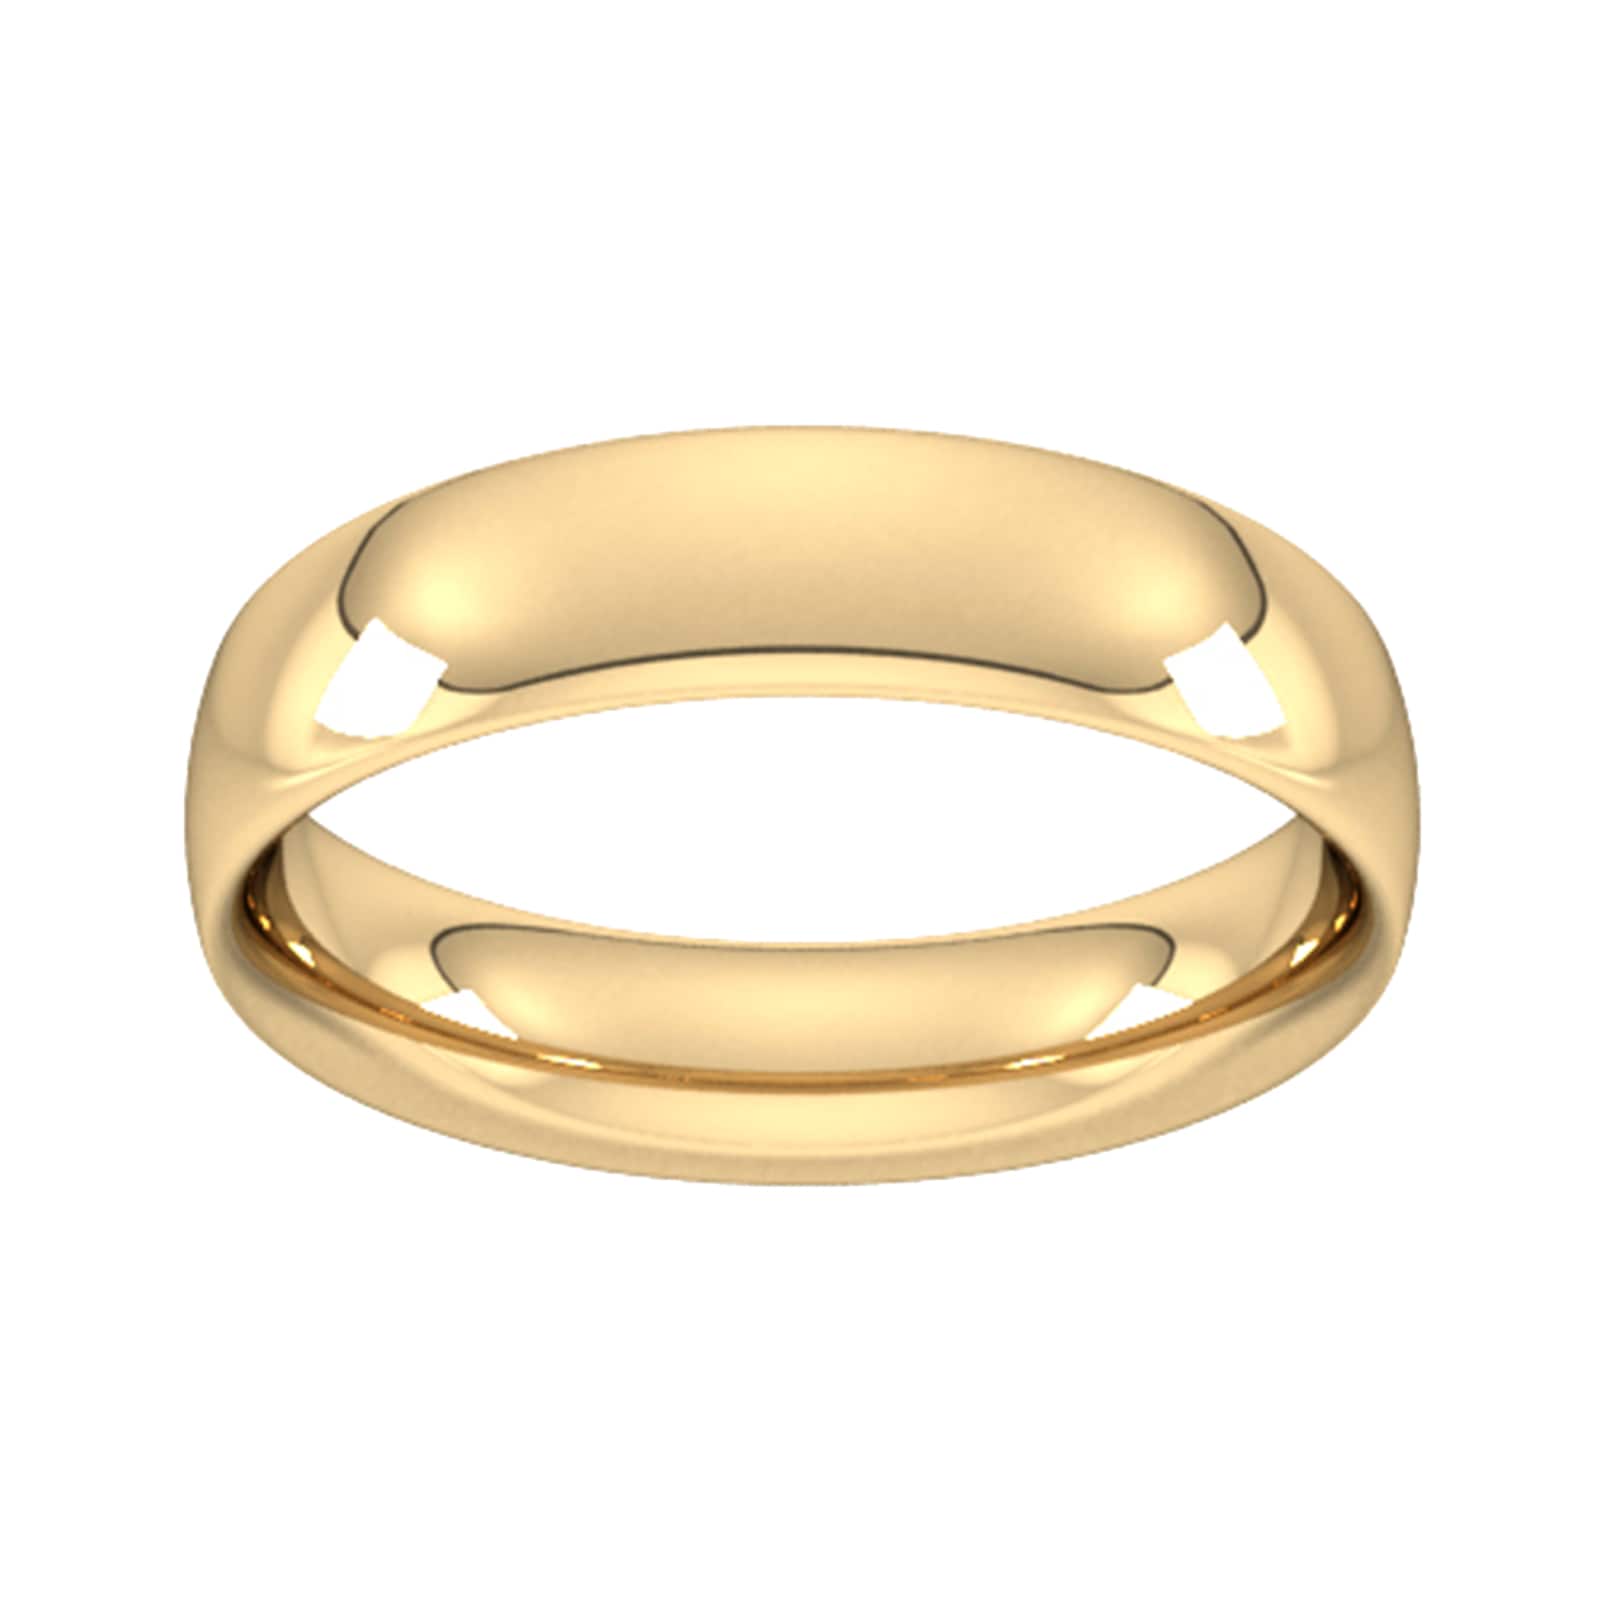 5mm Traditional Court Heavy Wedding Ring In 9 Carat Yellow Gold - Ring Size H